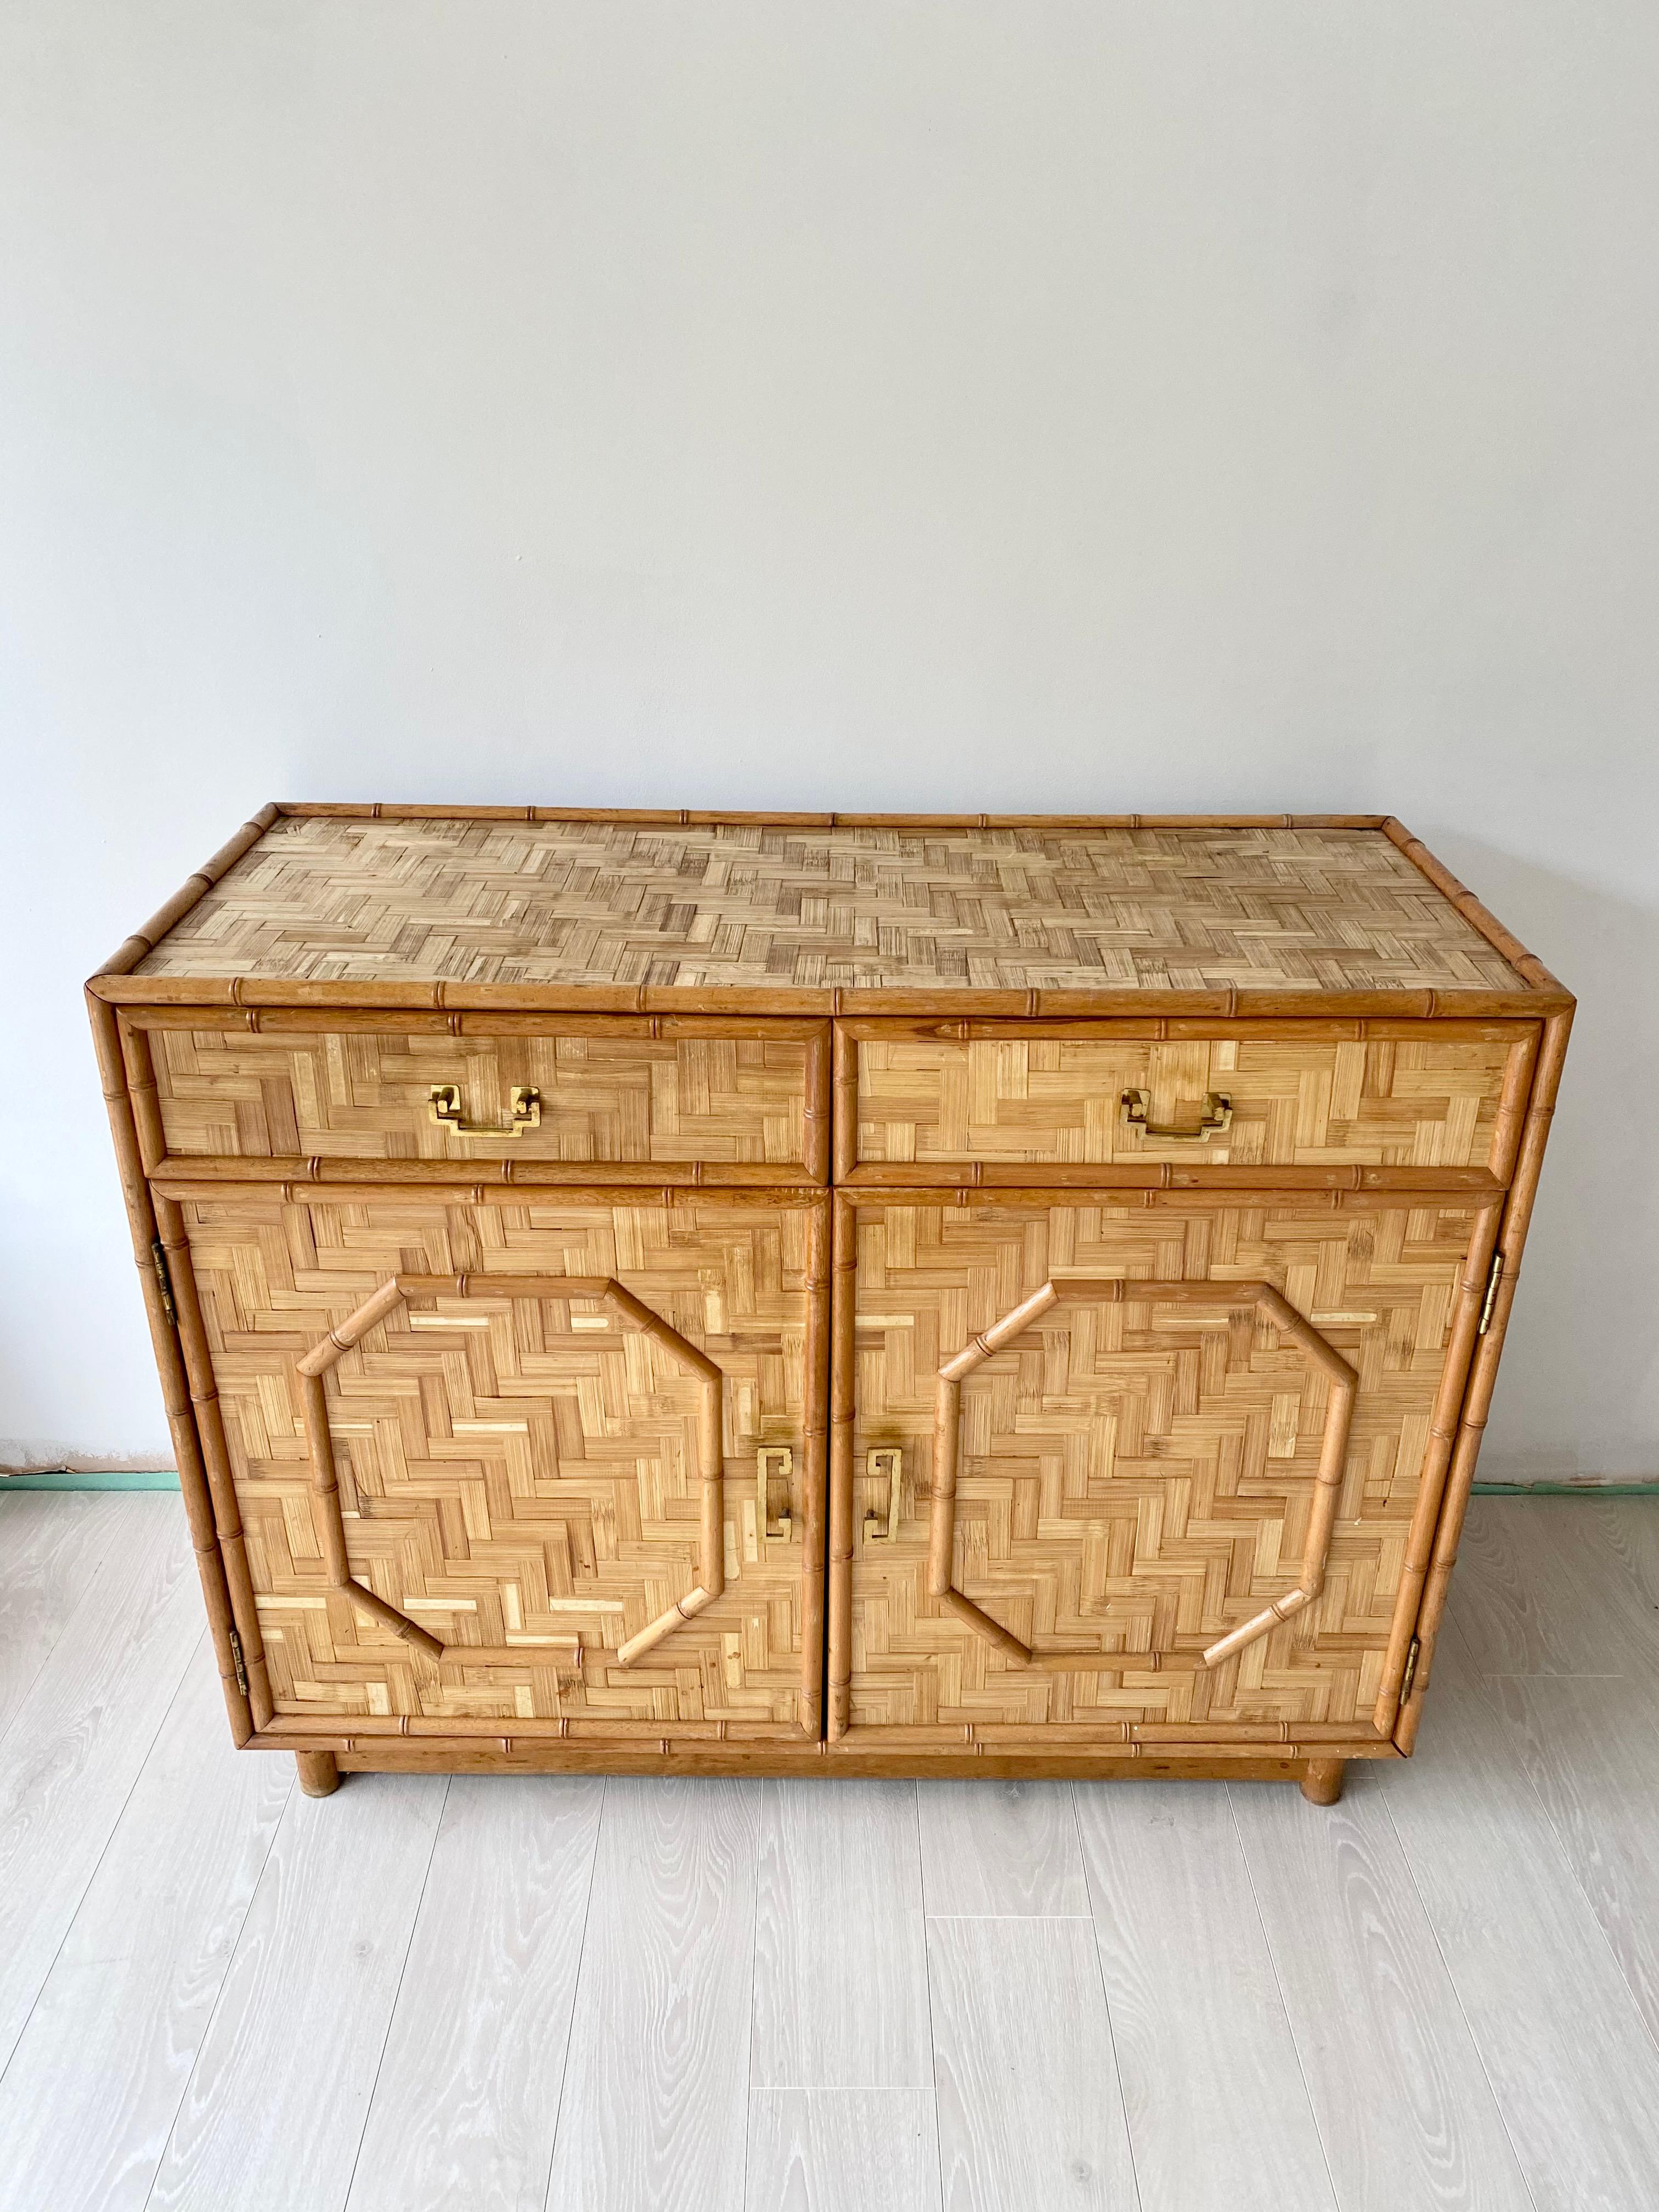 A midcentury rattan and bamboo sideboard.

In good vintage condition with aged brass handles.
Please note one top is slightly darker in colour than the other.

Measures: 114cm wide, 47cm deep, 90cm tall.

Pair available.